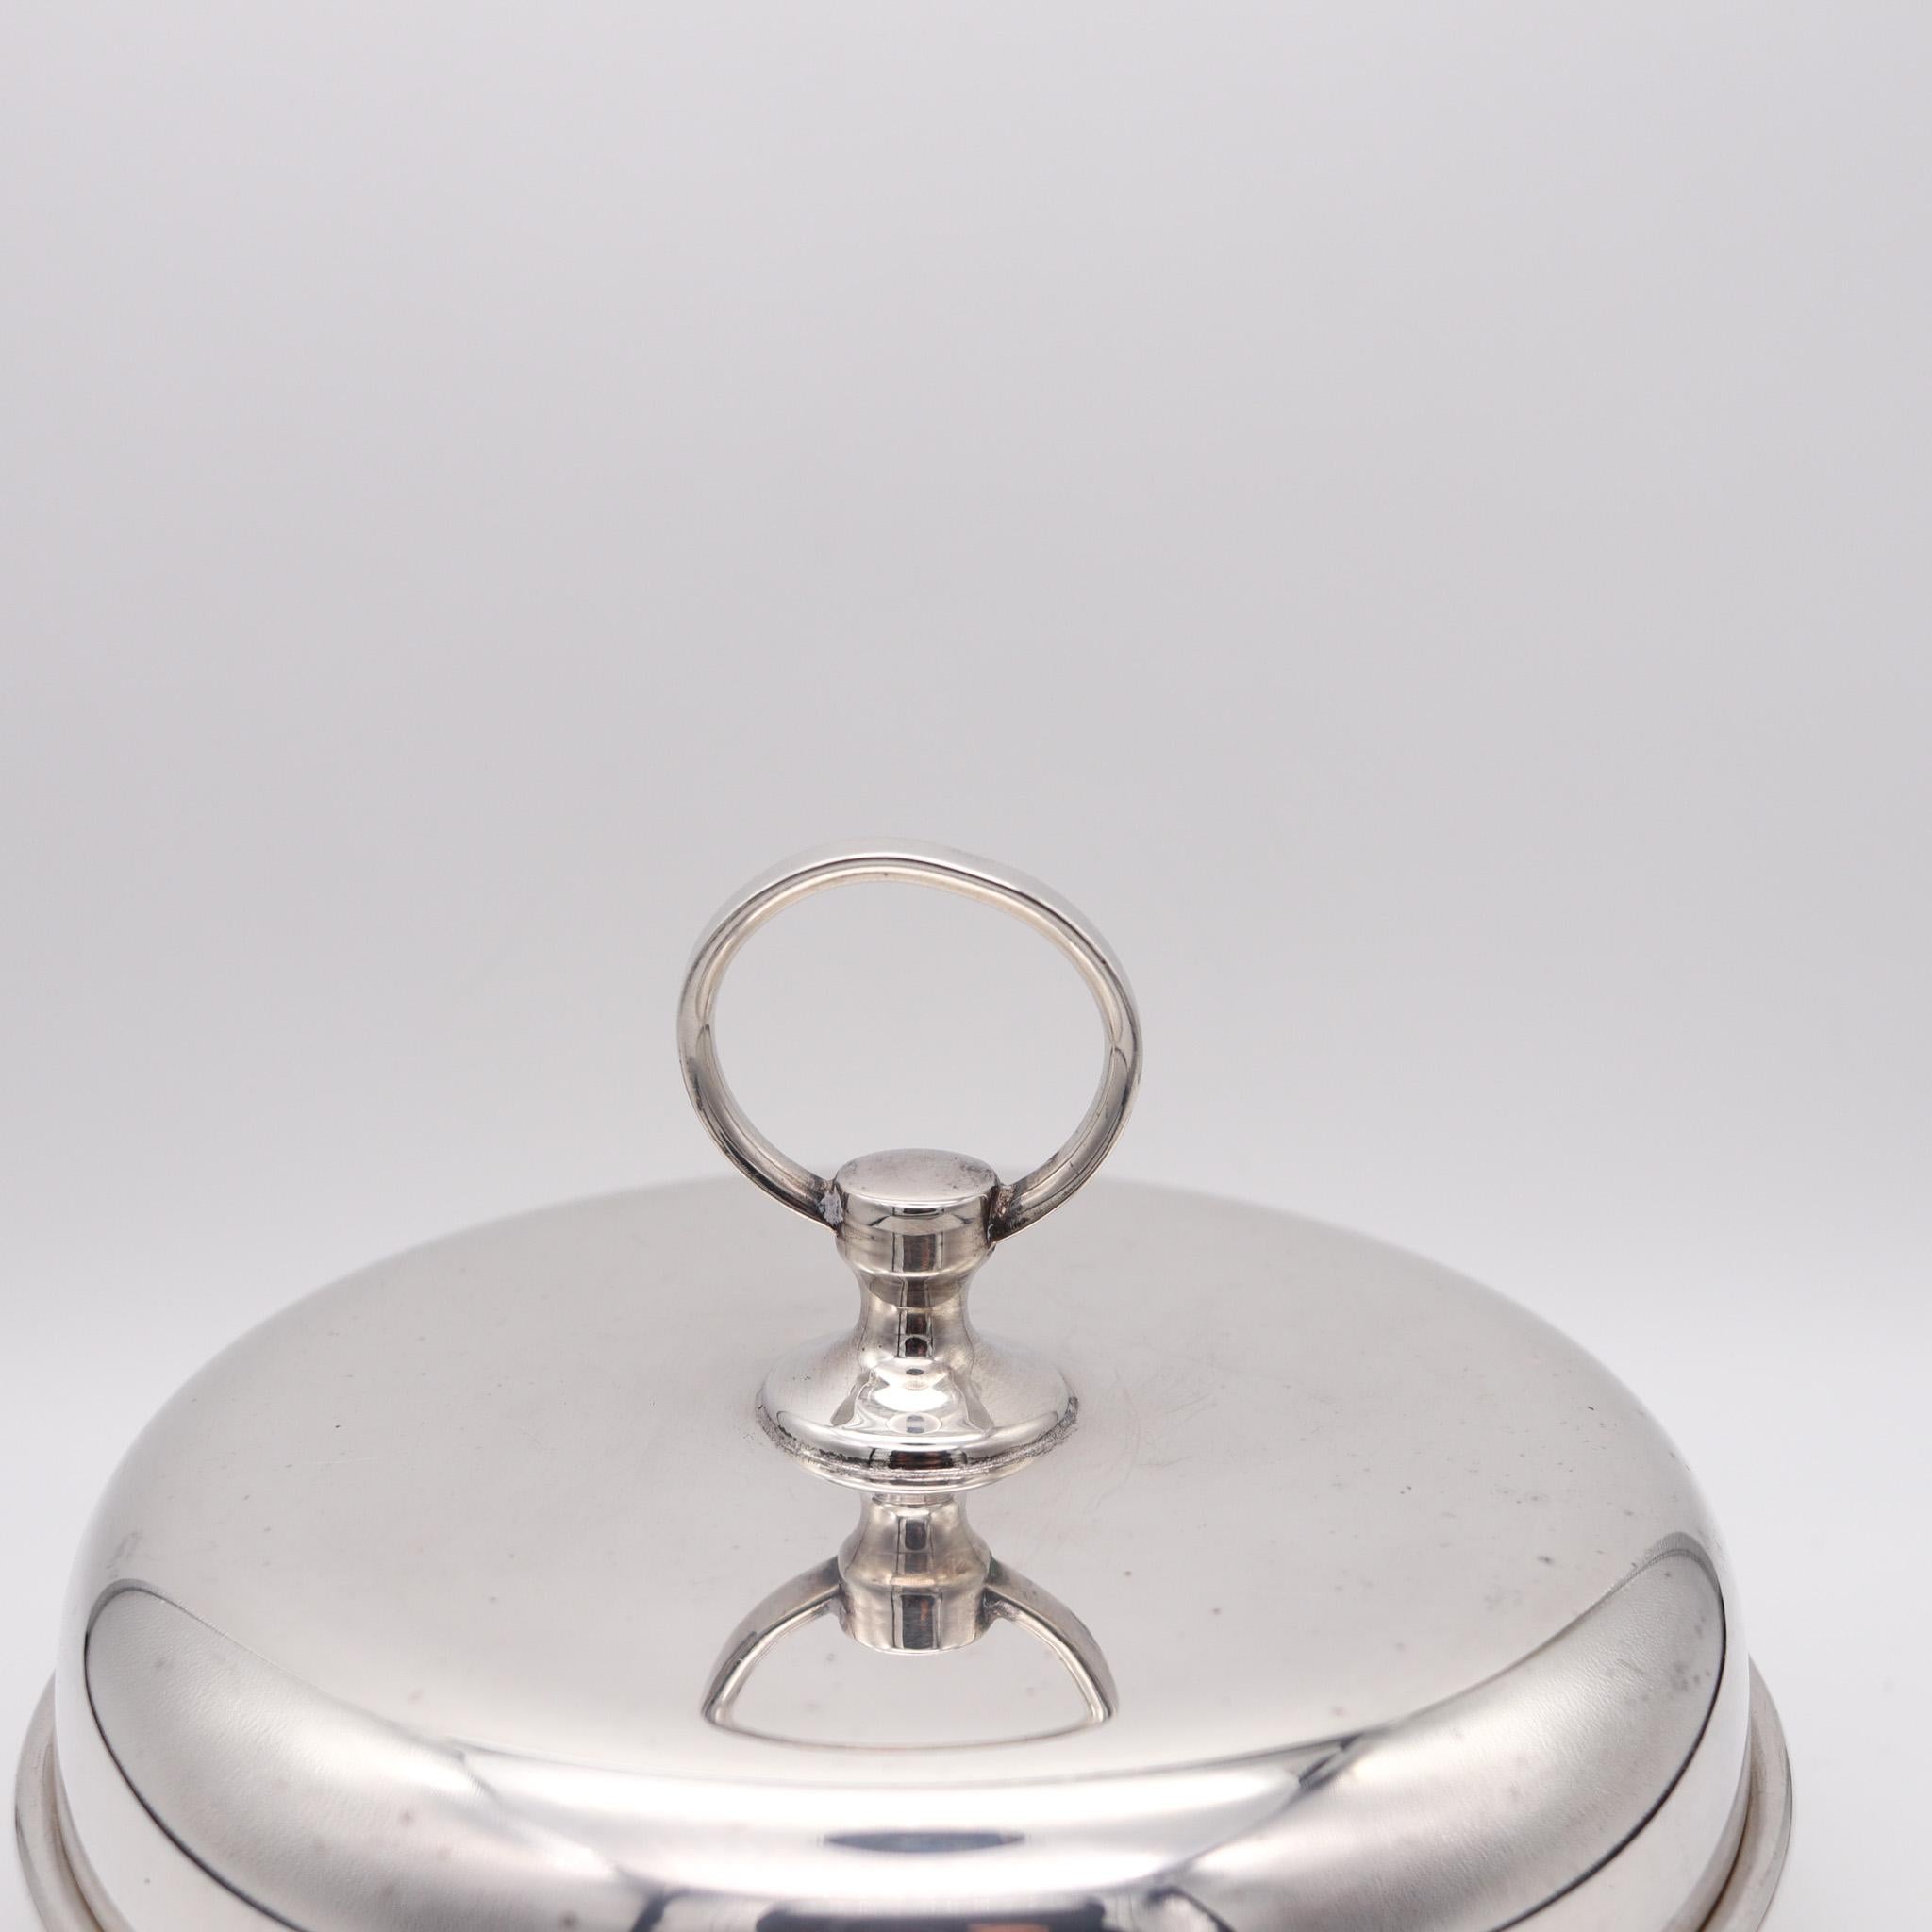 French Hermes Paris 1960 Vintage Modernist Desk Box Round Covered Dish In silver For Sale